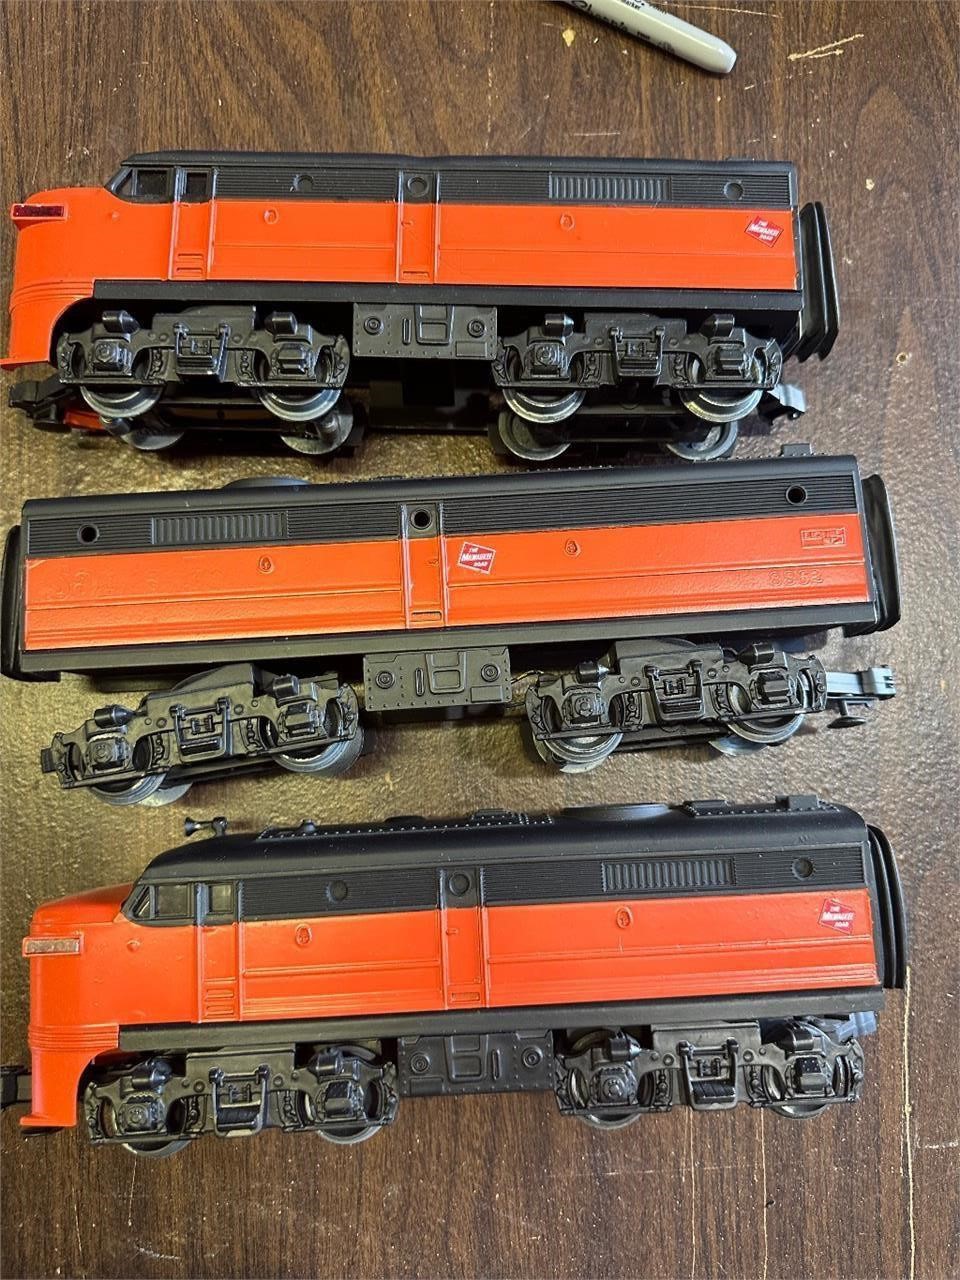 The World of Lionel Trains